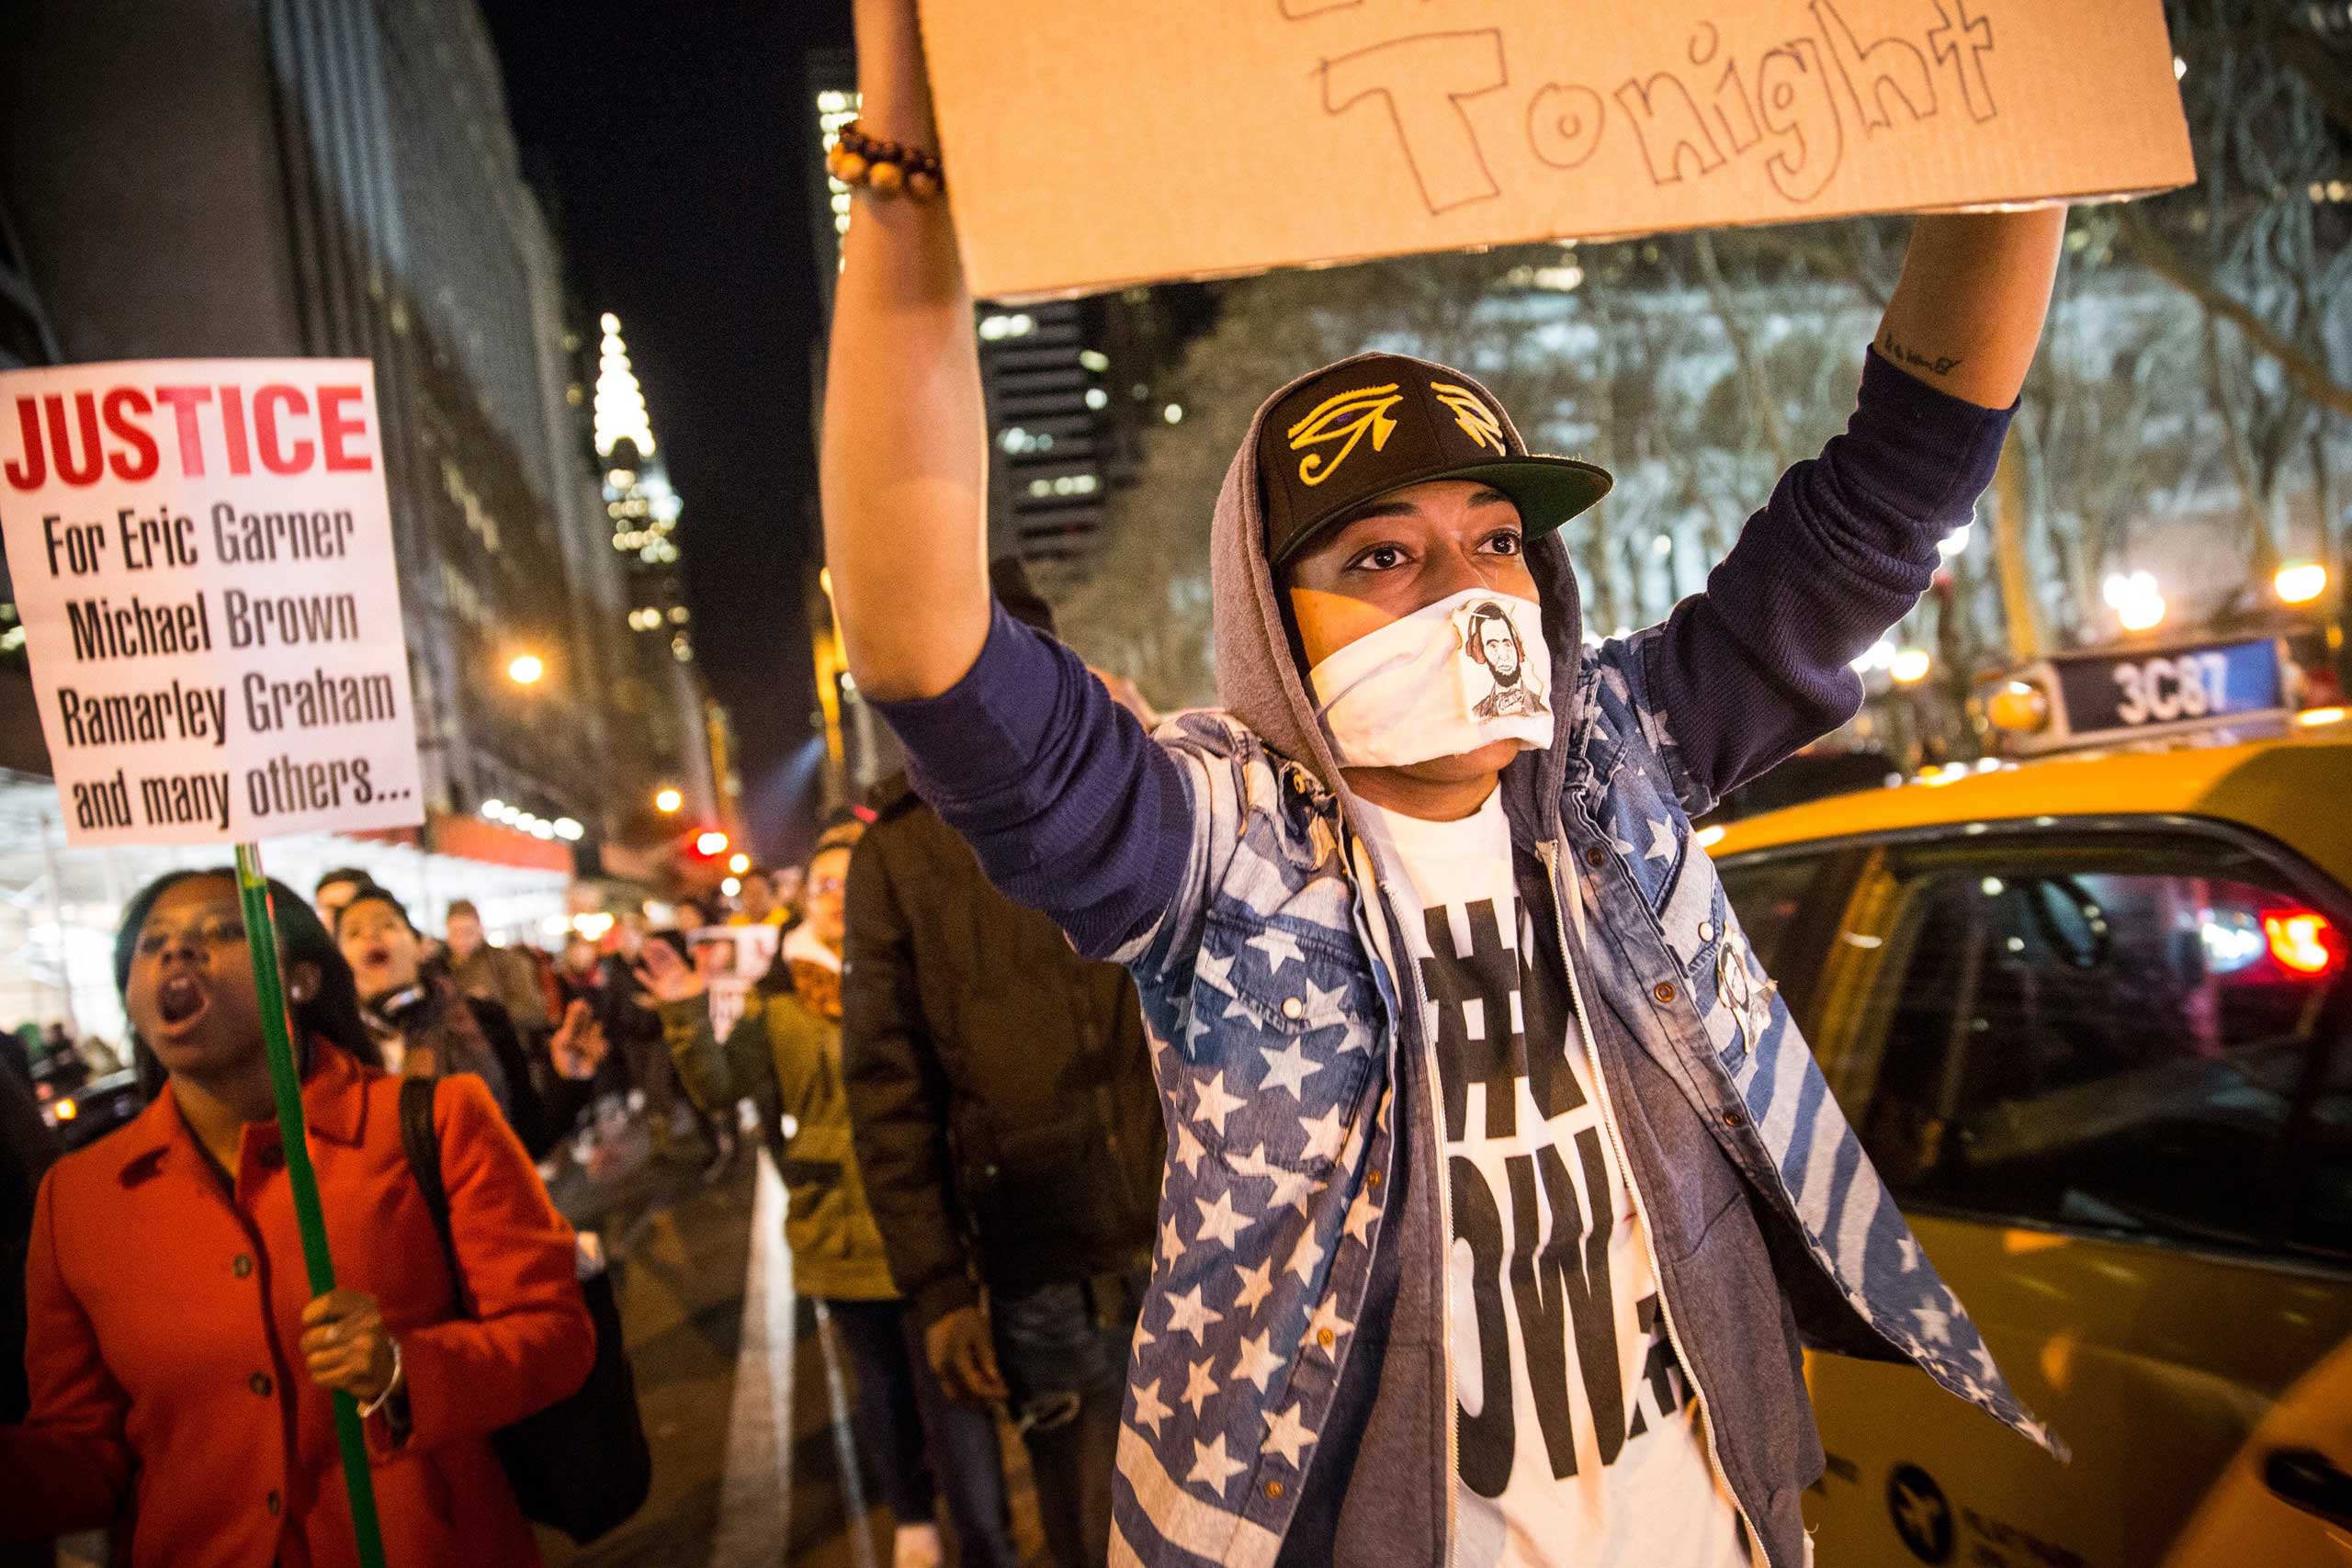 Demonstrators march through the streets of New York City on Dec. 3, 2014.